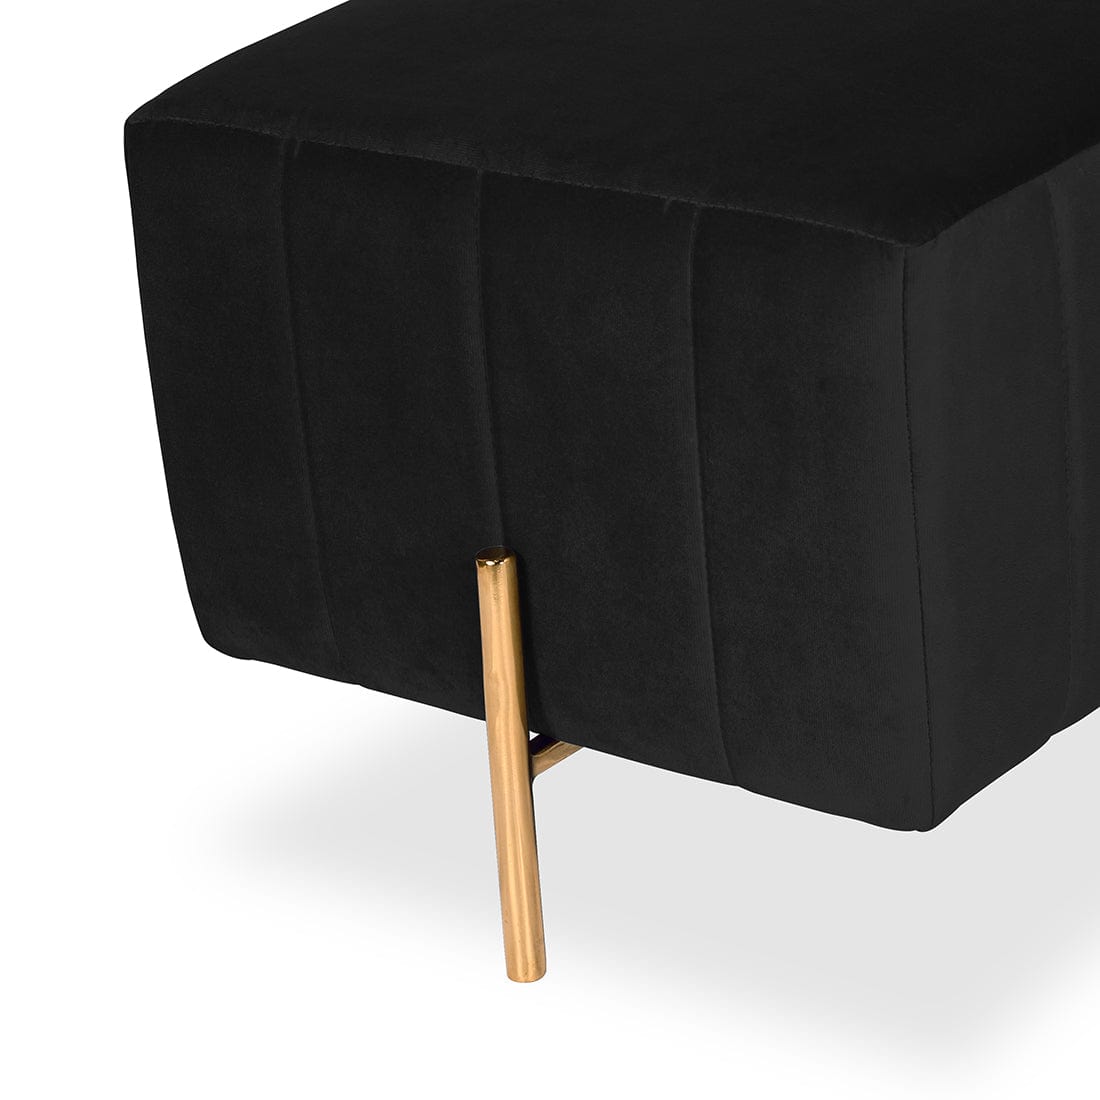 DOE BUCK SQUARE GOLD OTTOMAN STAINLESS STEEL IN BLACK